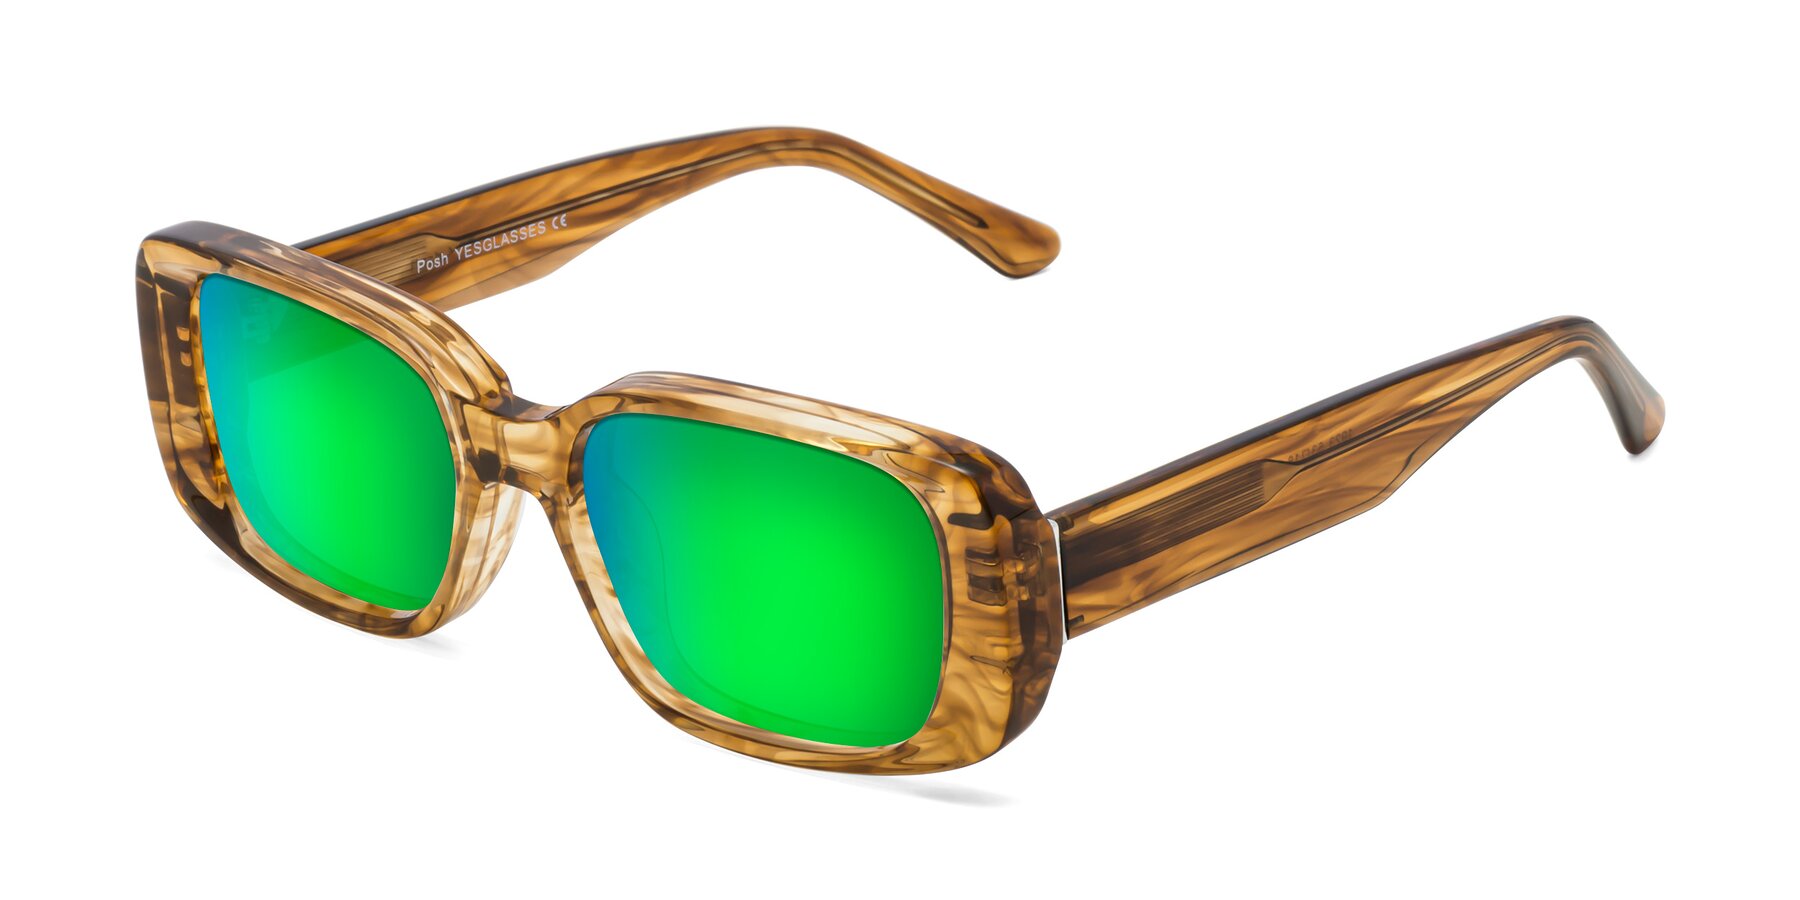 Angle of Posh in Stripe Amber with Green Mirrored Lenses